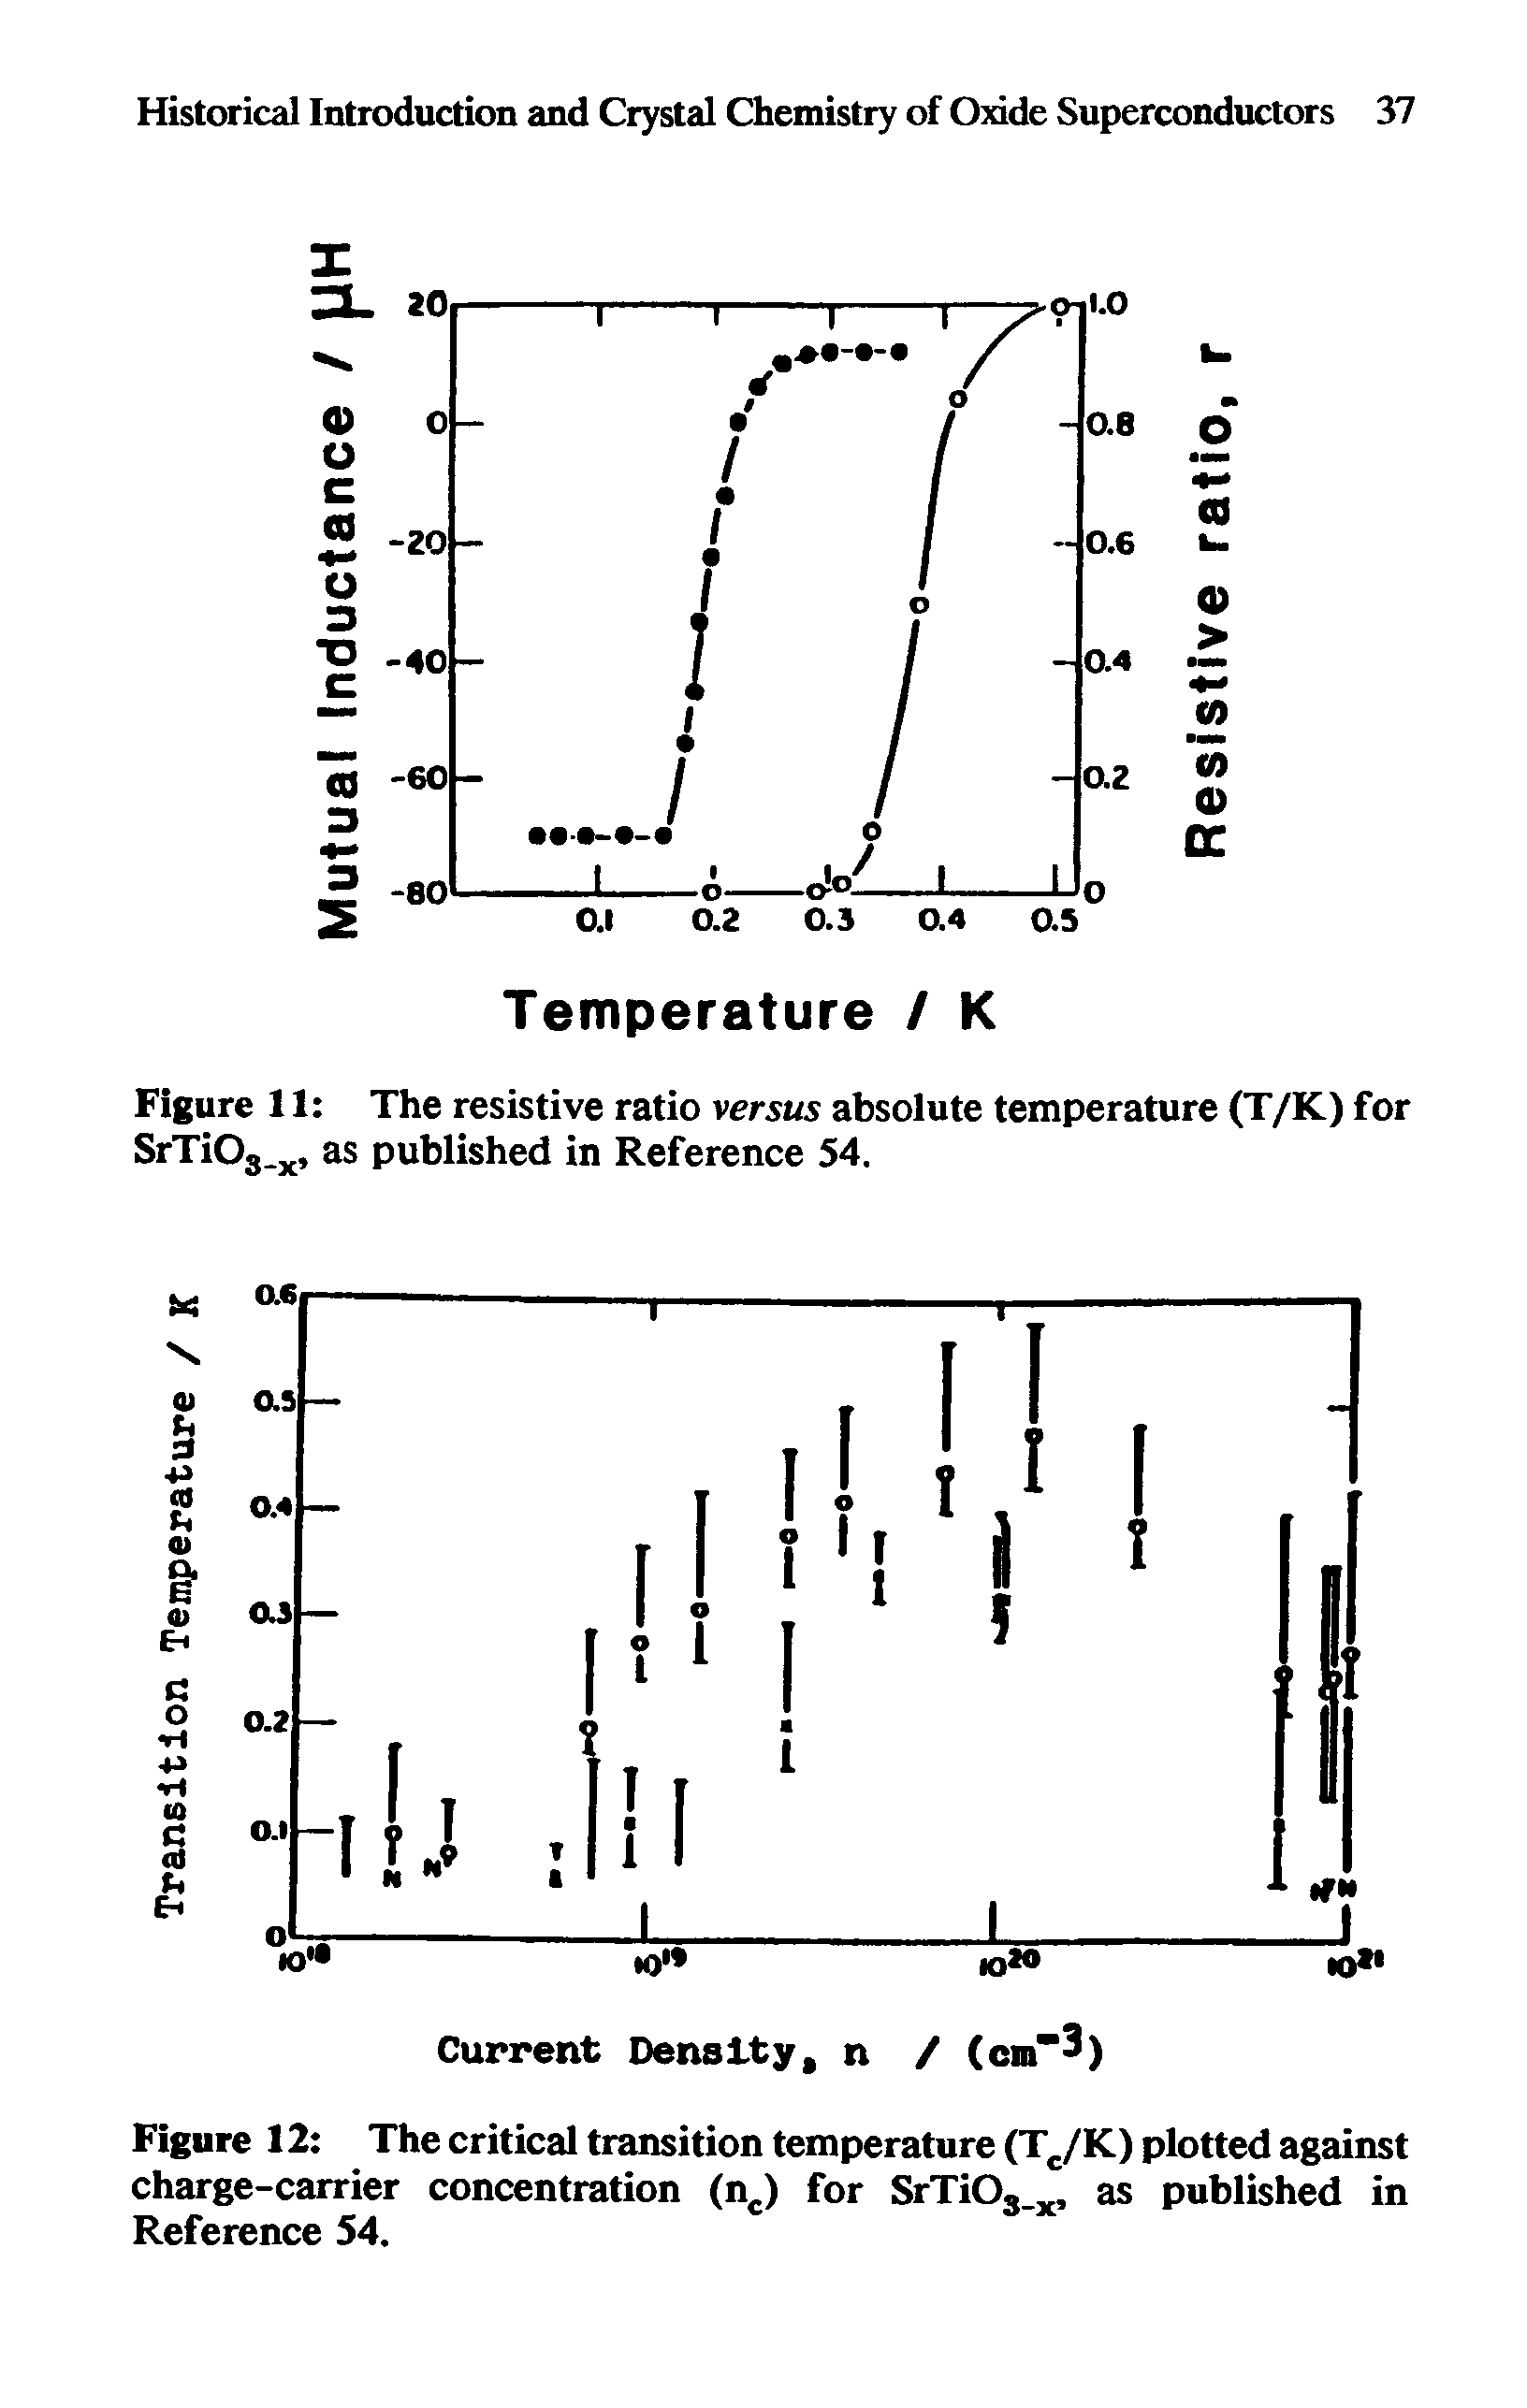 Figure 12 The critical transition temperature (Tc/K) plotted against charge-carrier concentration (nc) for SrTiOs x, as published in Reference 54.